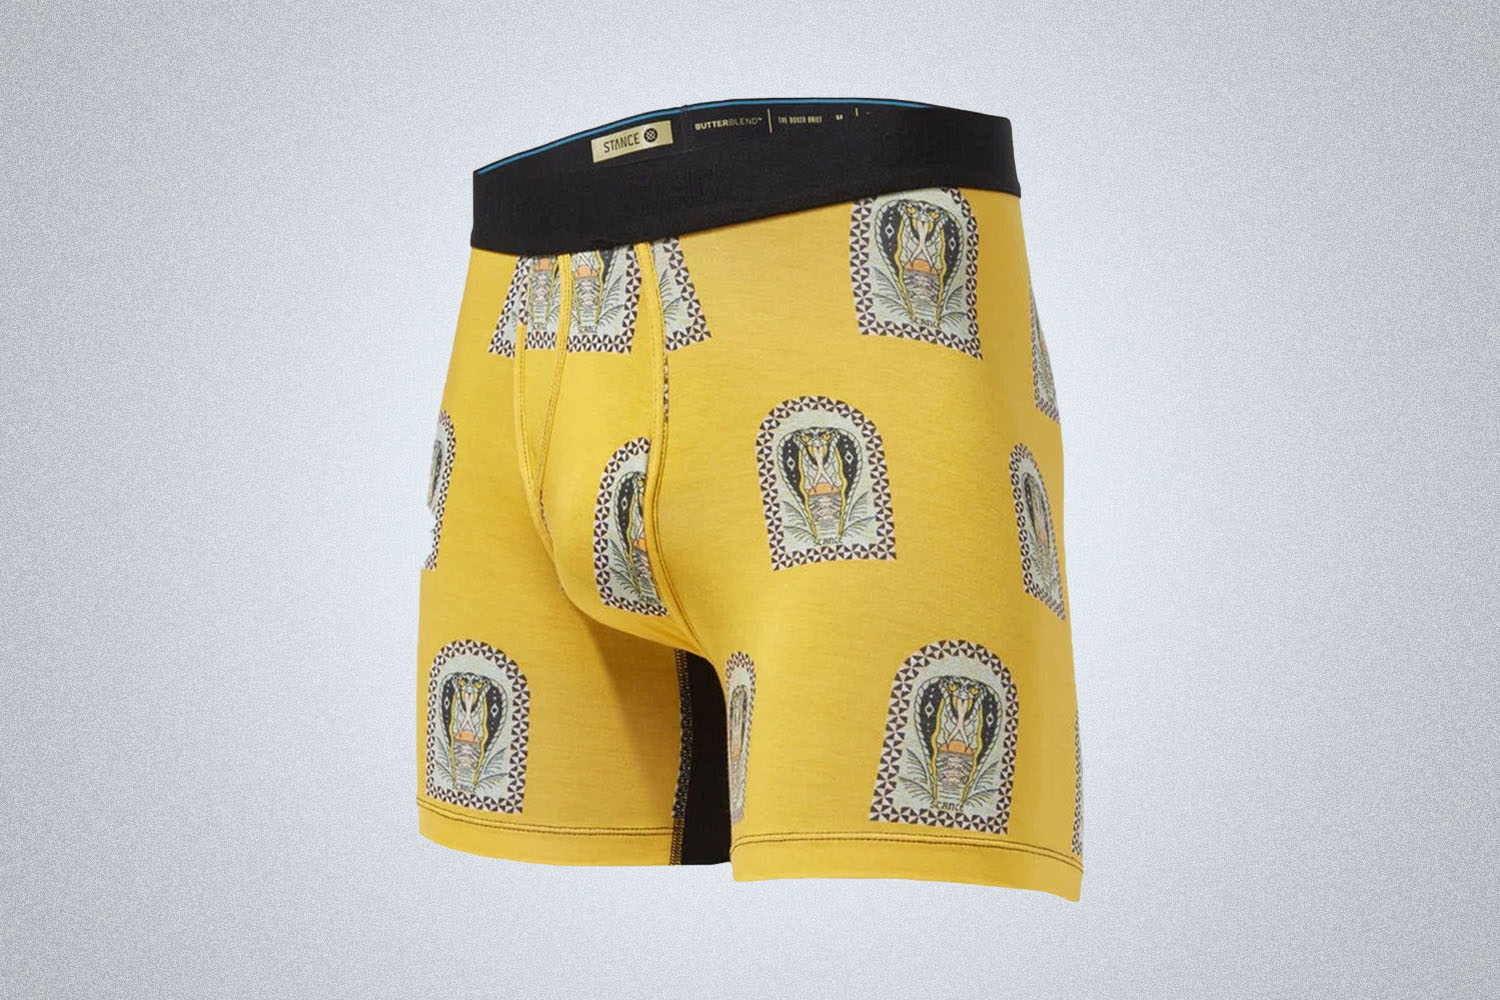 a pair of yellow and patterned stance boxer briefs with a black waistband on a gray background